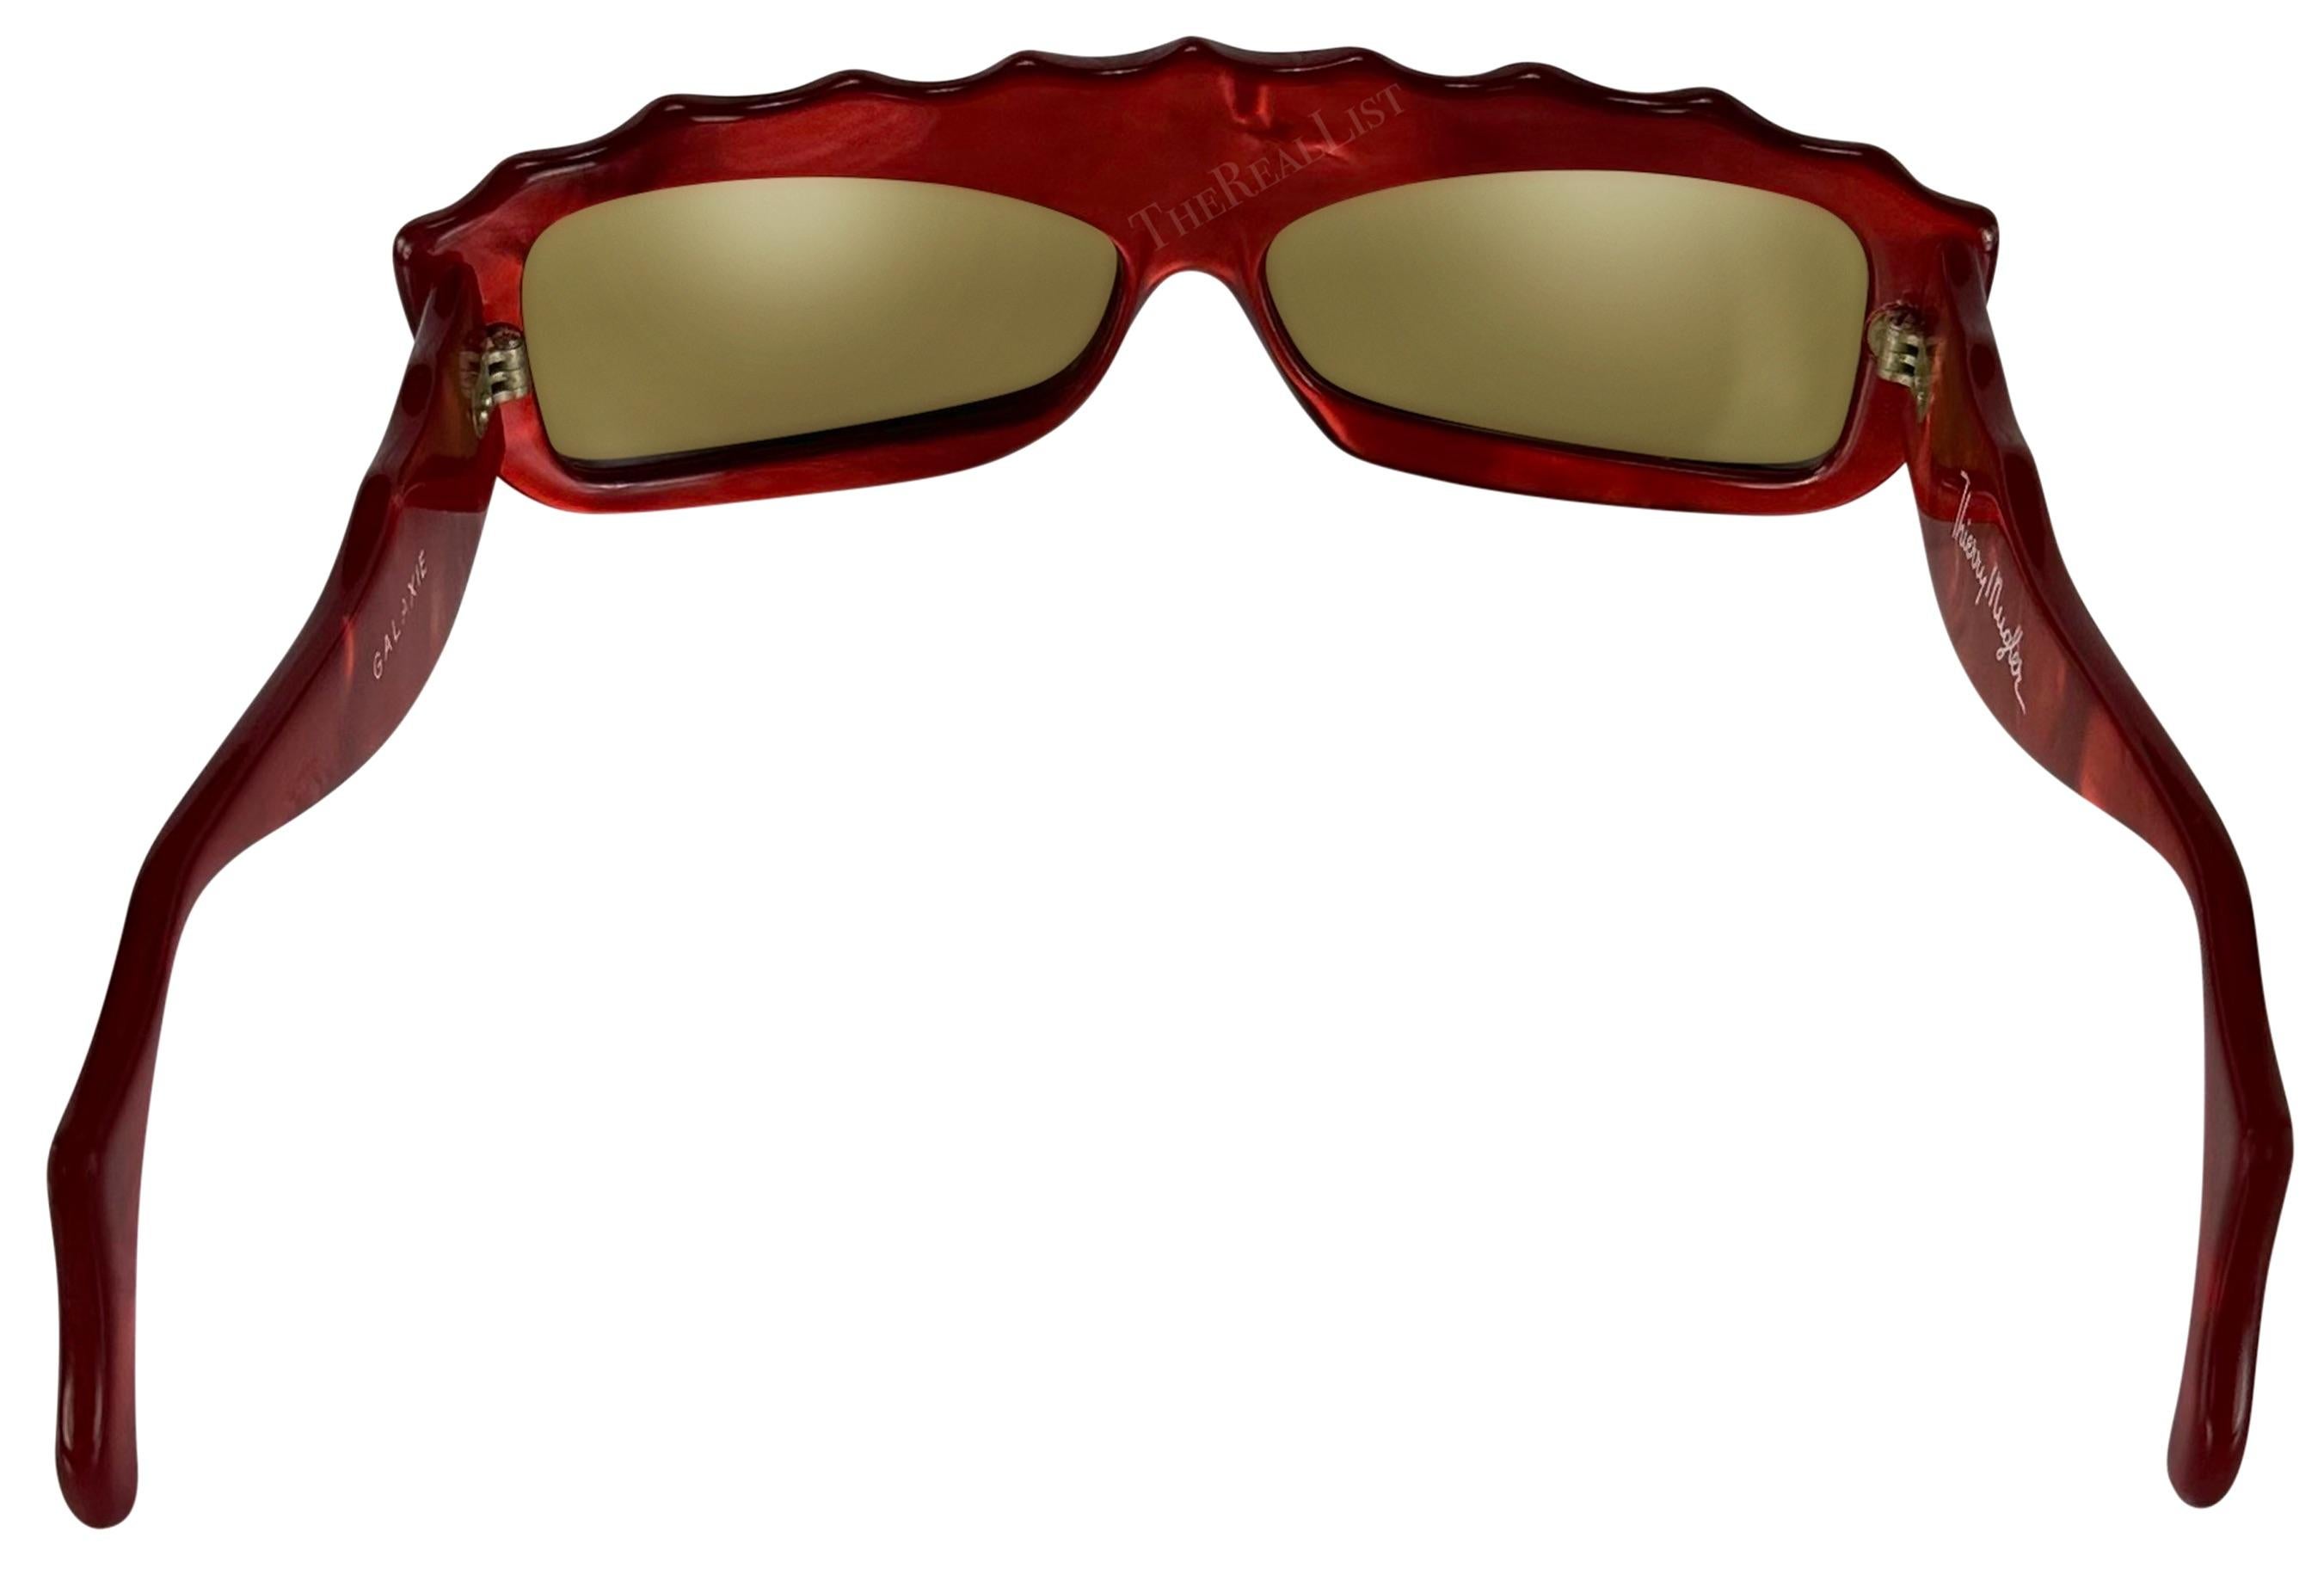 S/S 1979 Thierry Mugler Red Opalescent Red Sculpted Rectangular Sunglasses For Sale 5